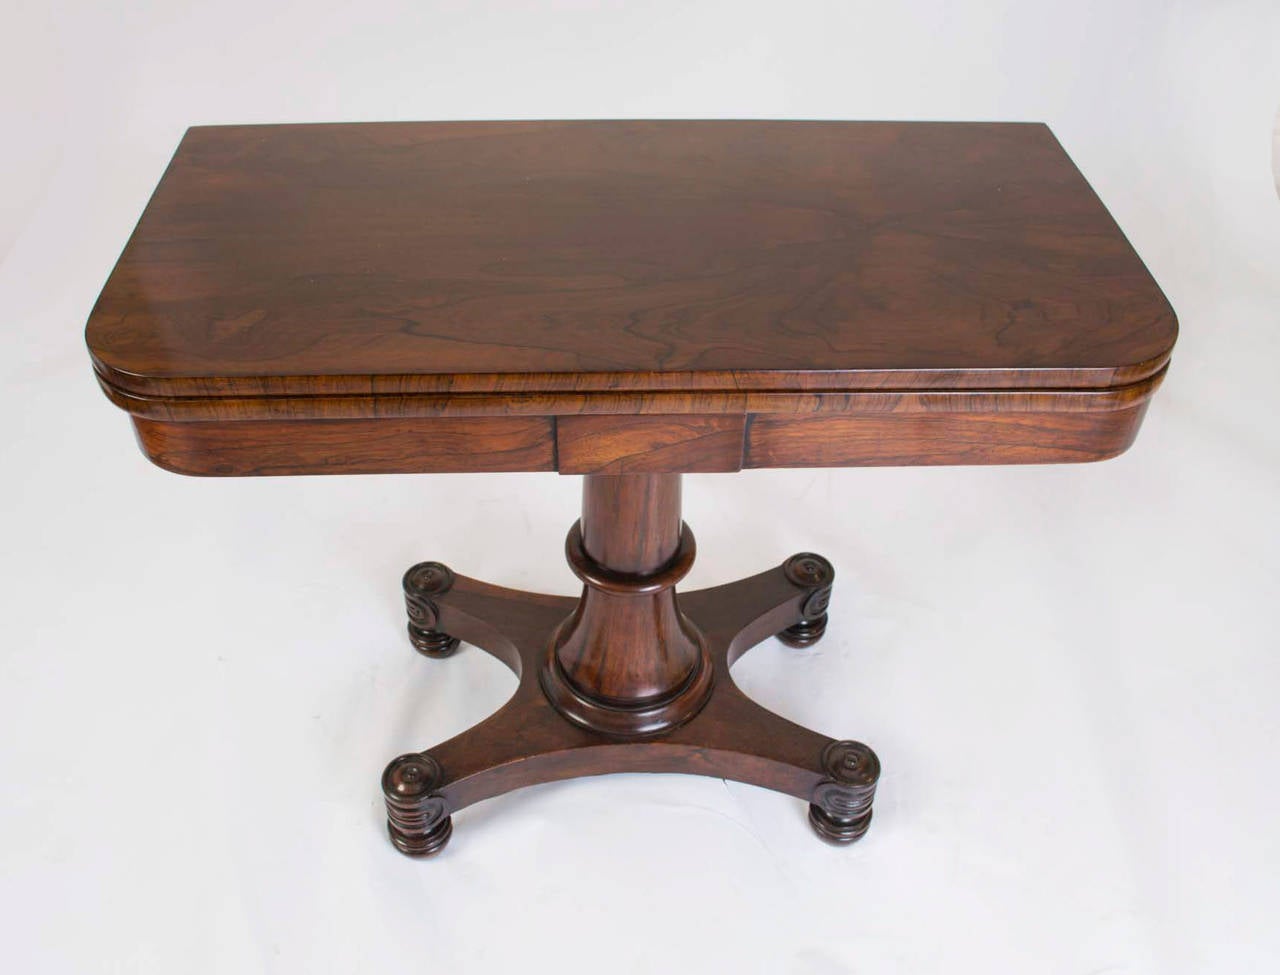 This is an antique William IV rosewood card table, circa 1830 in date. 

This gorgeous card table is crafted from beautiful rosewood which has been French polished to highlight the beautiful grain of the wood. 

The top swivels to reveal a